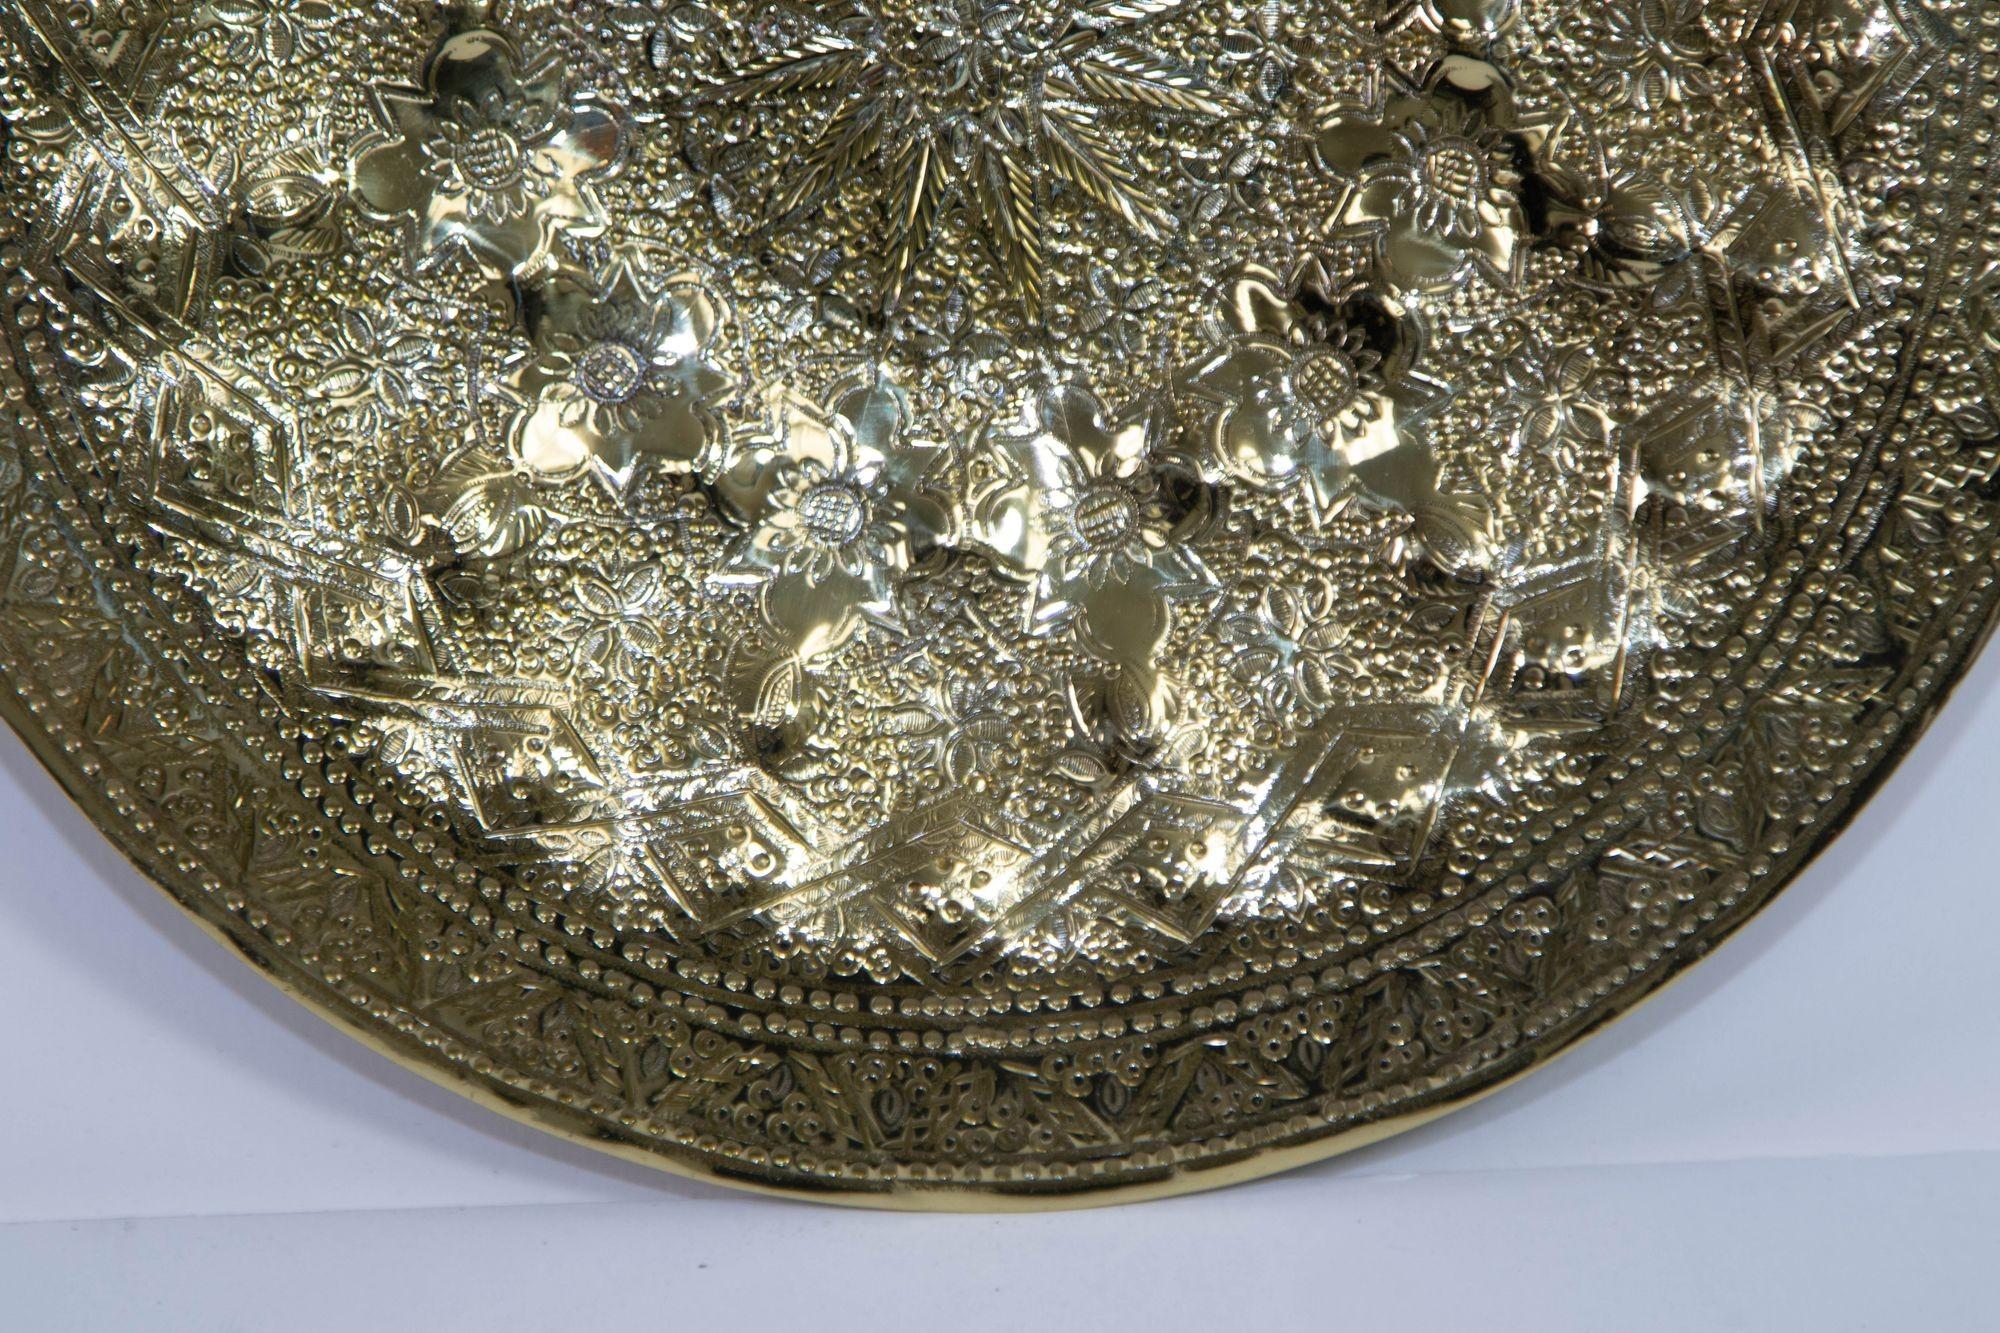 Islamic Persian Polished Brass Tray Collectible Metal Work Platter 10 inches D. For Sale 5